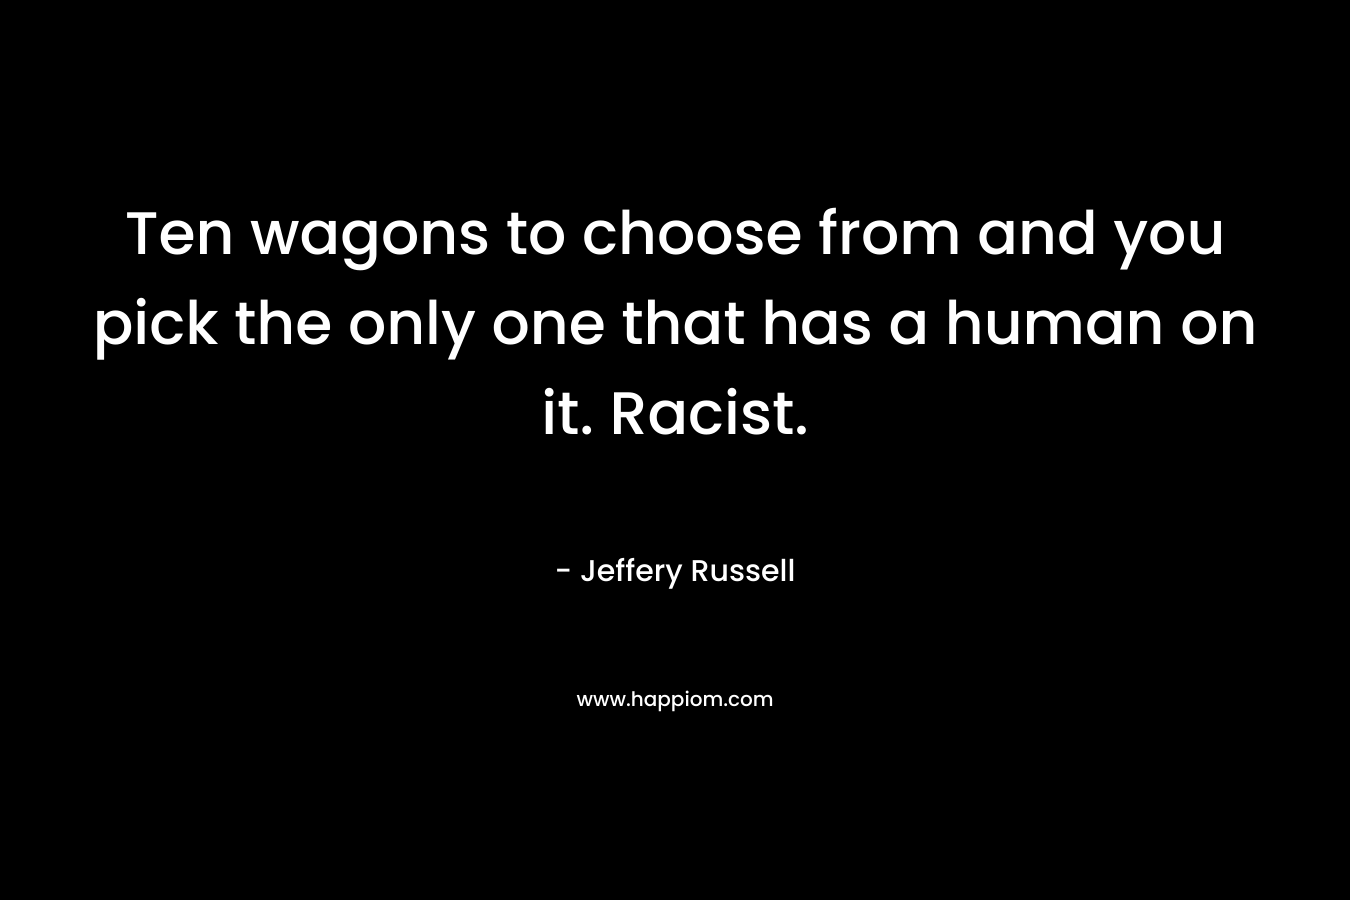 Ten wagons to choose from and you pick the only one that has a human on it. Racist. – Jeffery Russell